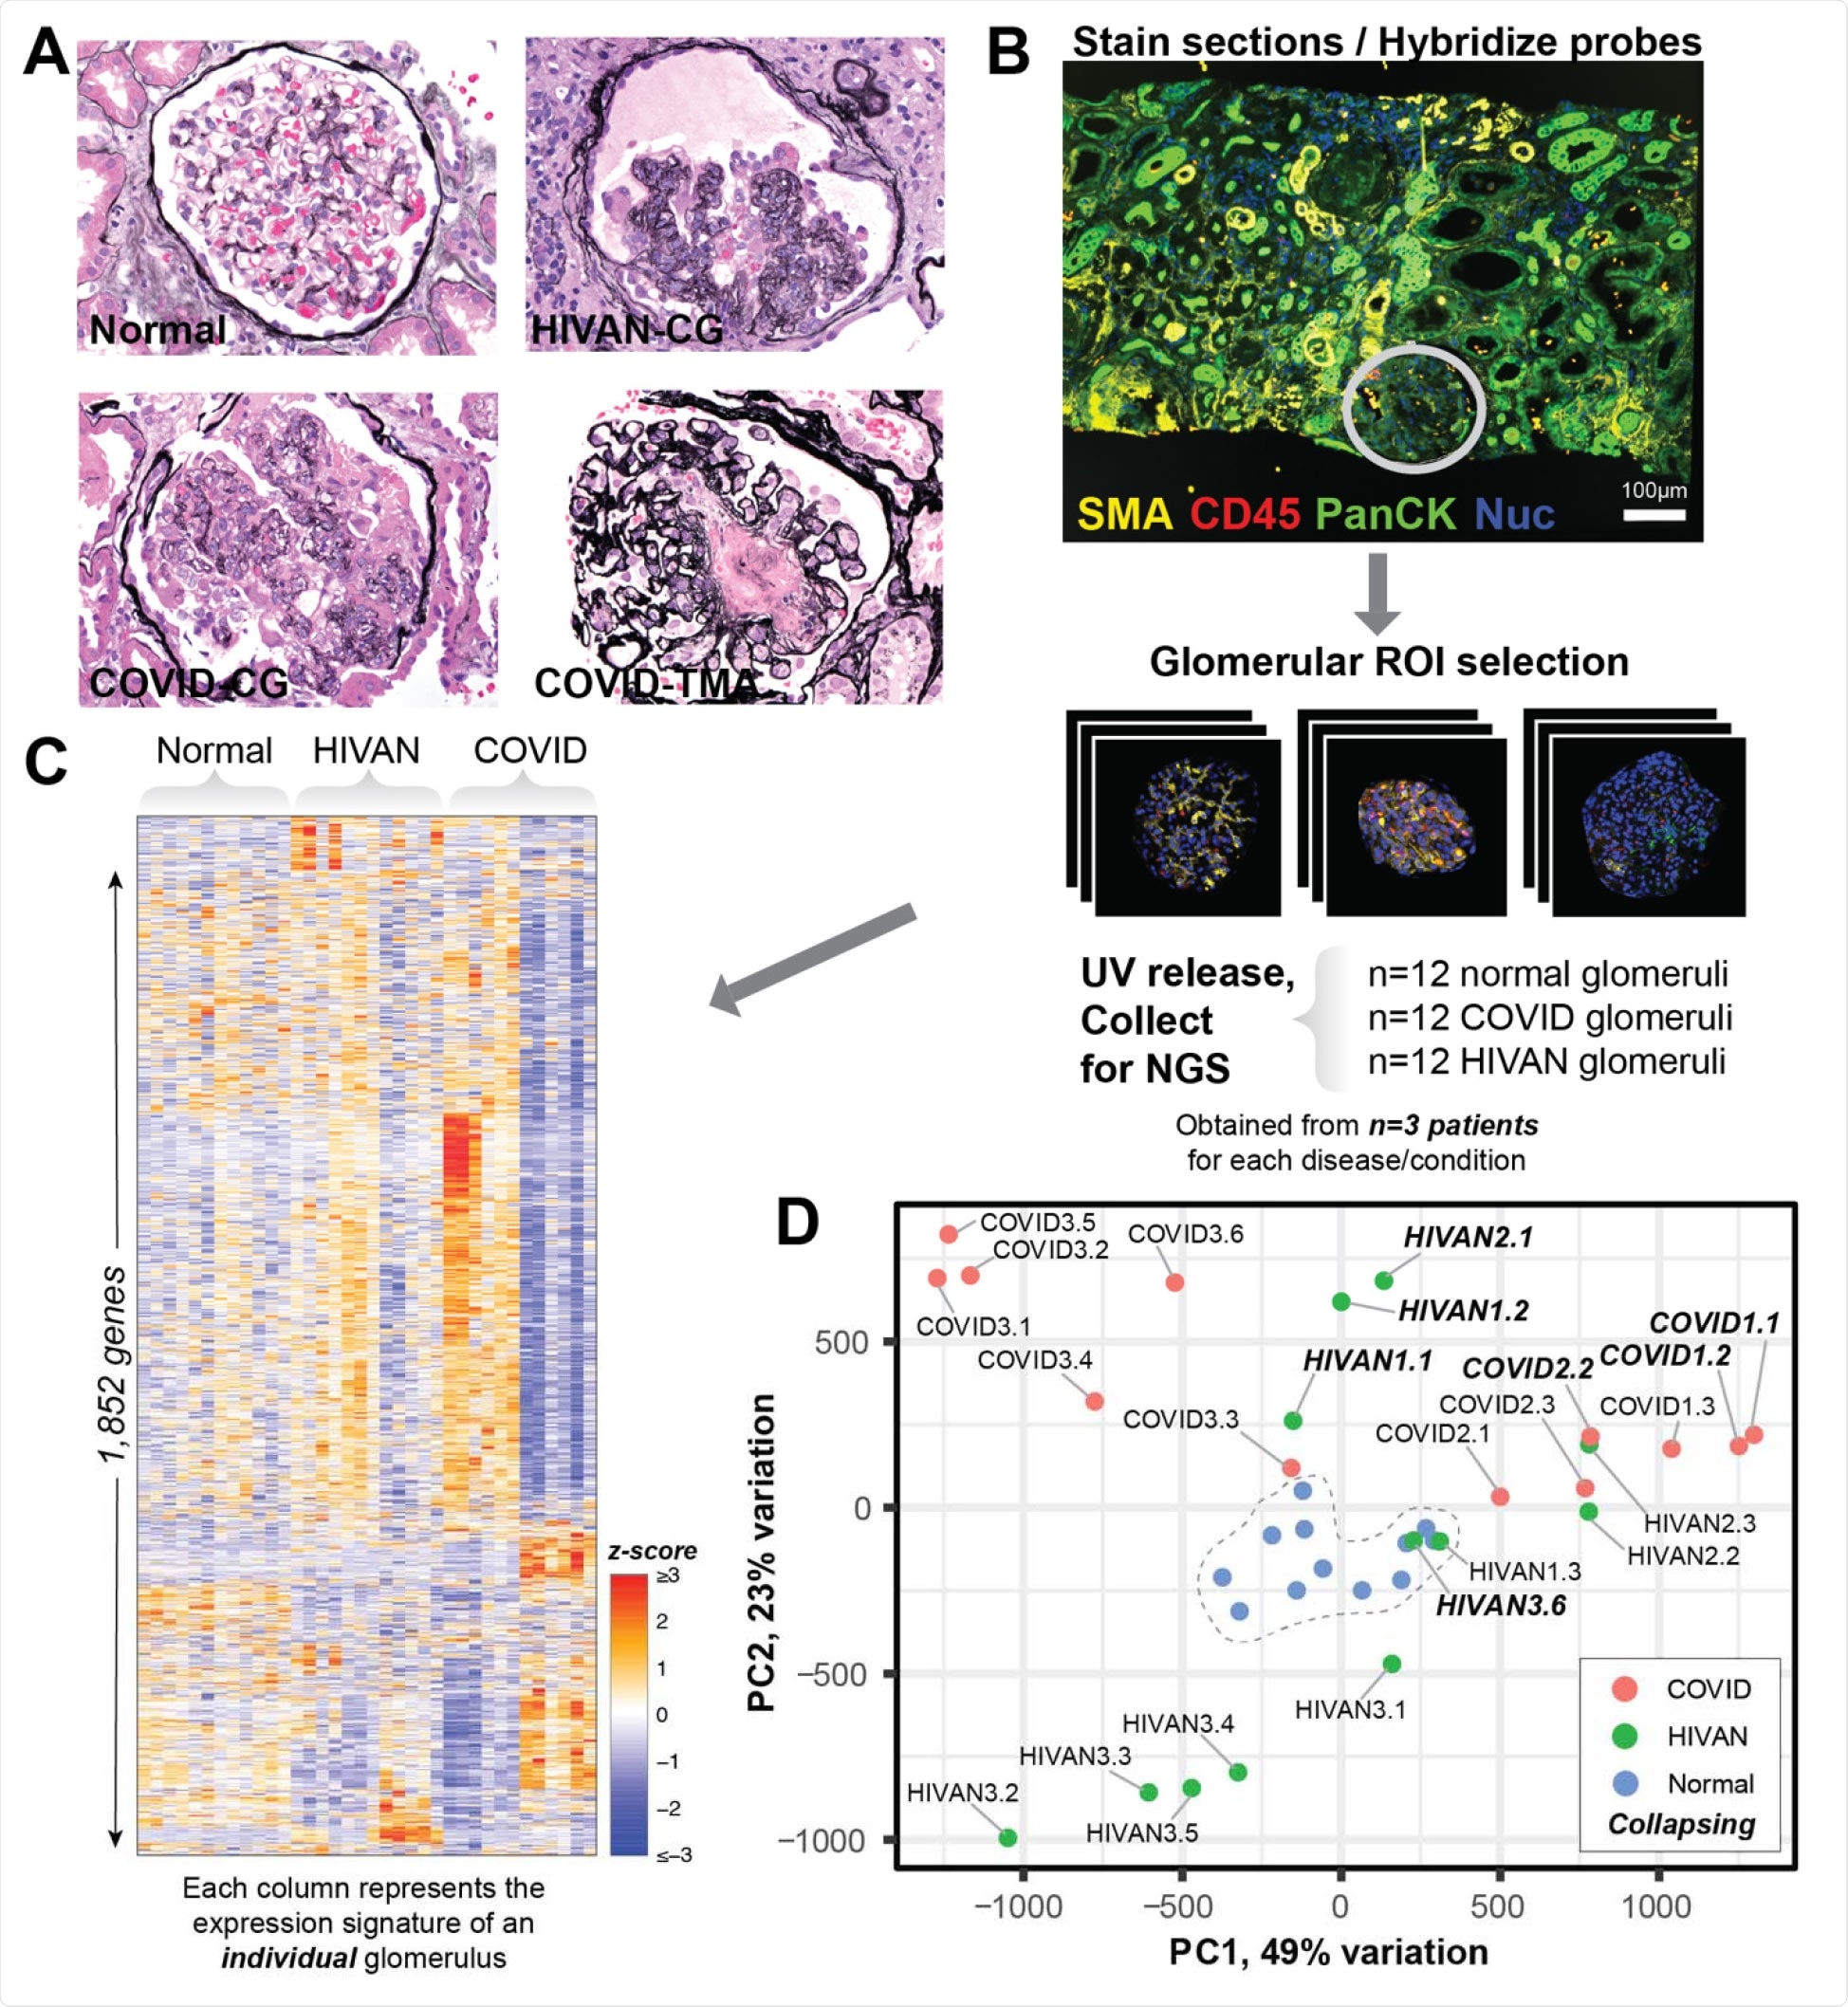 Digital spatial profiling of individual glomeruli from HIV and COVID-19 patients. A) Representative Jones-stained sections of glomeruli with histology analyzed by digital spatial profiling. HIVAN – HIV associated nephropathy; CG – collapsing glomerulopathy; COVID – SARS-CoV-2 associated disease; TMA – thrombotic microangiopathy. B) Biopsy sections were immunostained with fluorescent antibodies against the indicated markers and free from regions of interest (ROI) were drawn around glomeruli of interest. Bound probes were released and quantified by next generation sequencing. C) 1852 genes (rows) were quantified from each glomerulus (columns) from